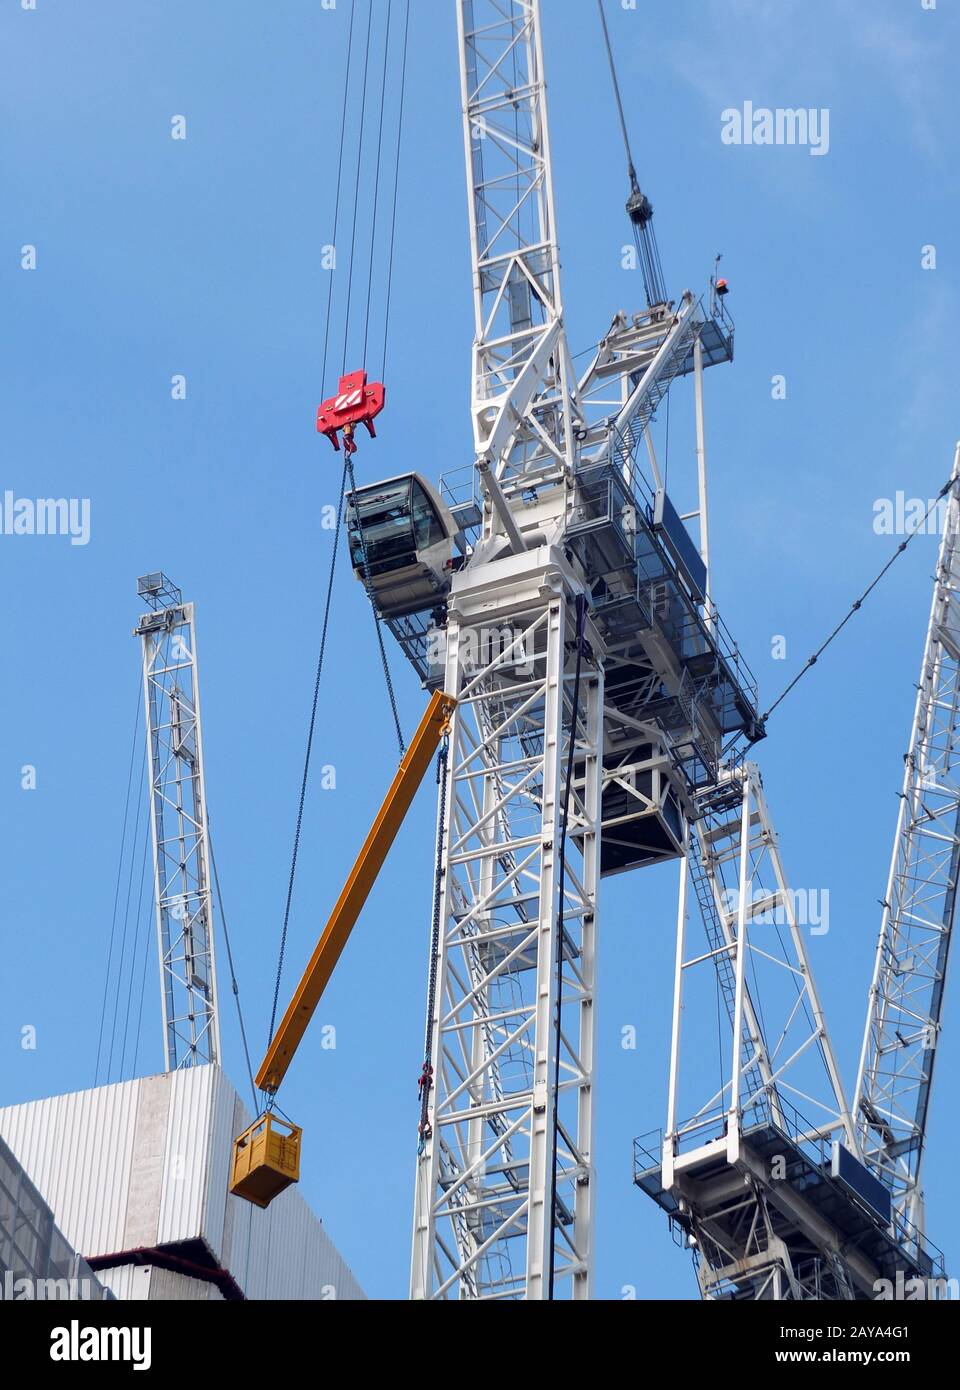 tall construction cranes working on a large development site with concrete large structure Stock Photo